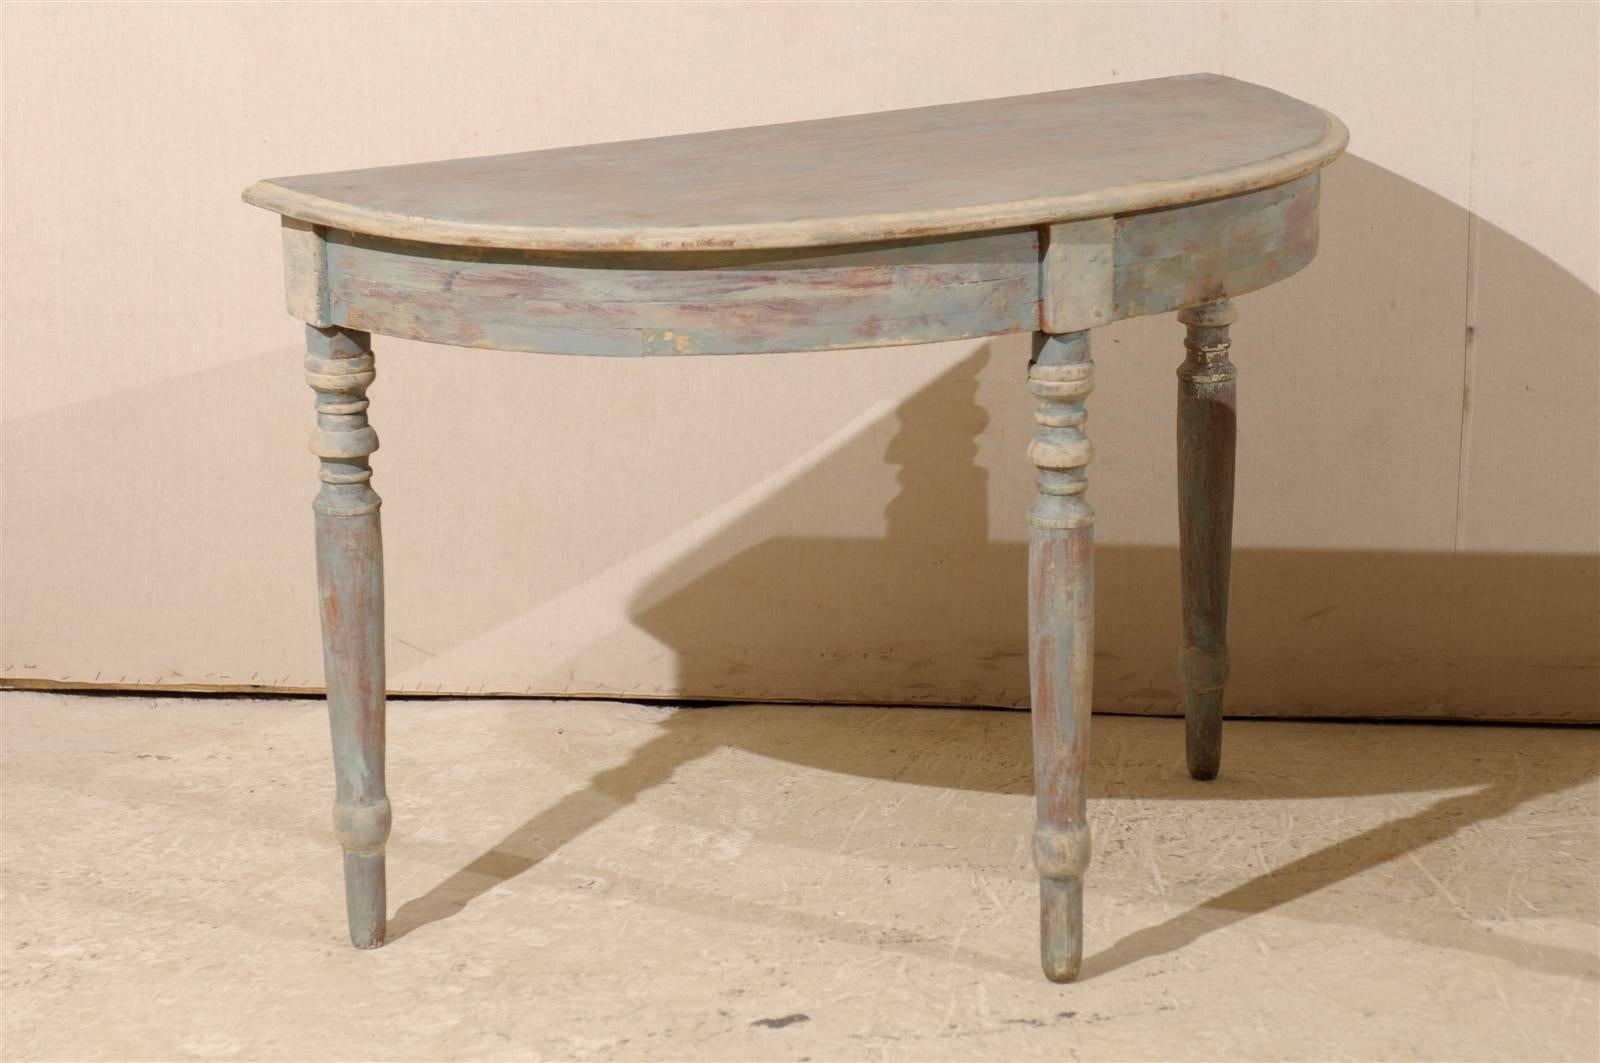 Pair of Swedish 19th Century Painted Wood Demilune Tables, Light Blue-Green 4